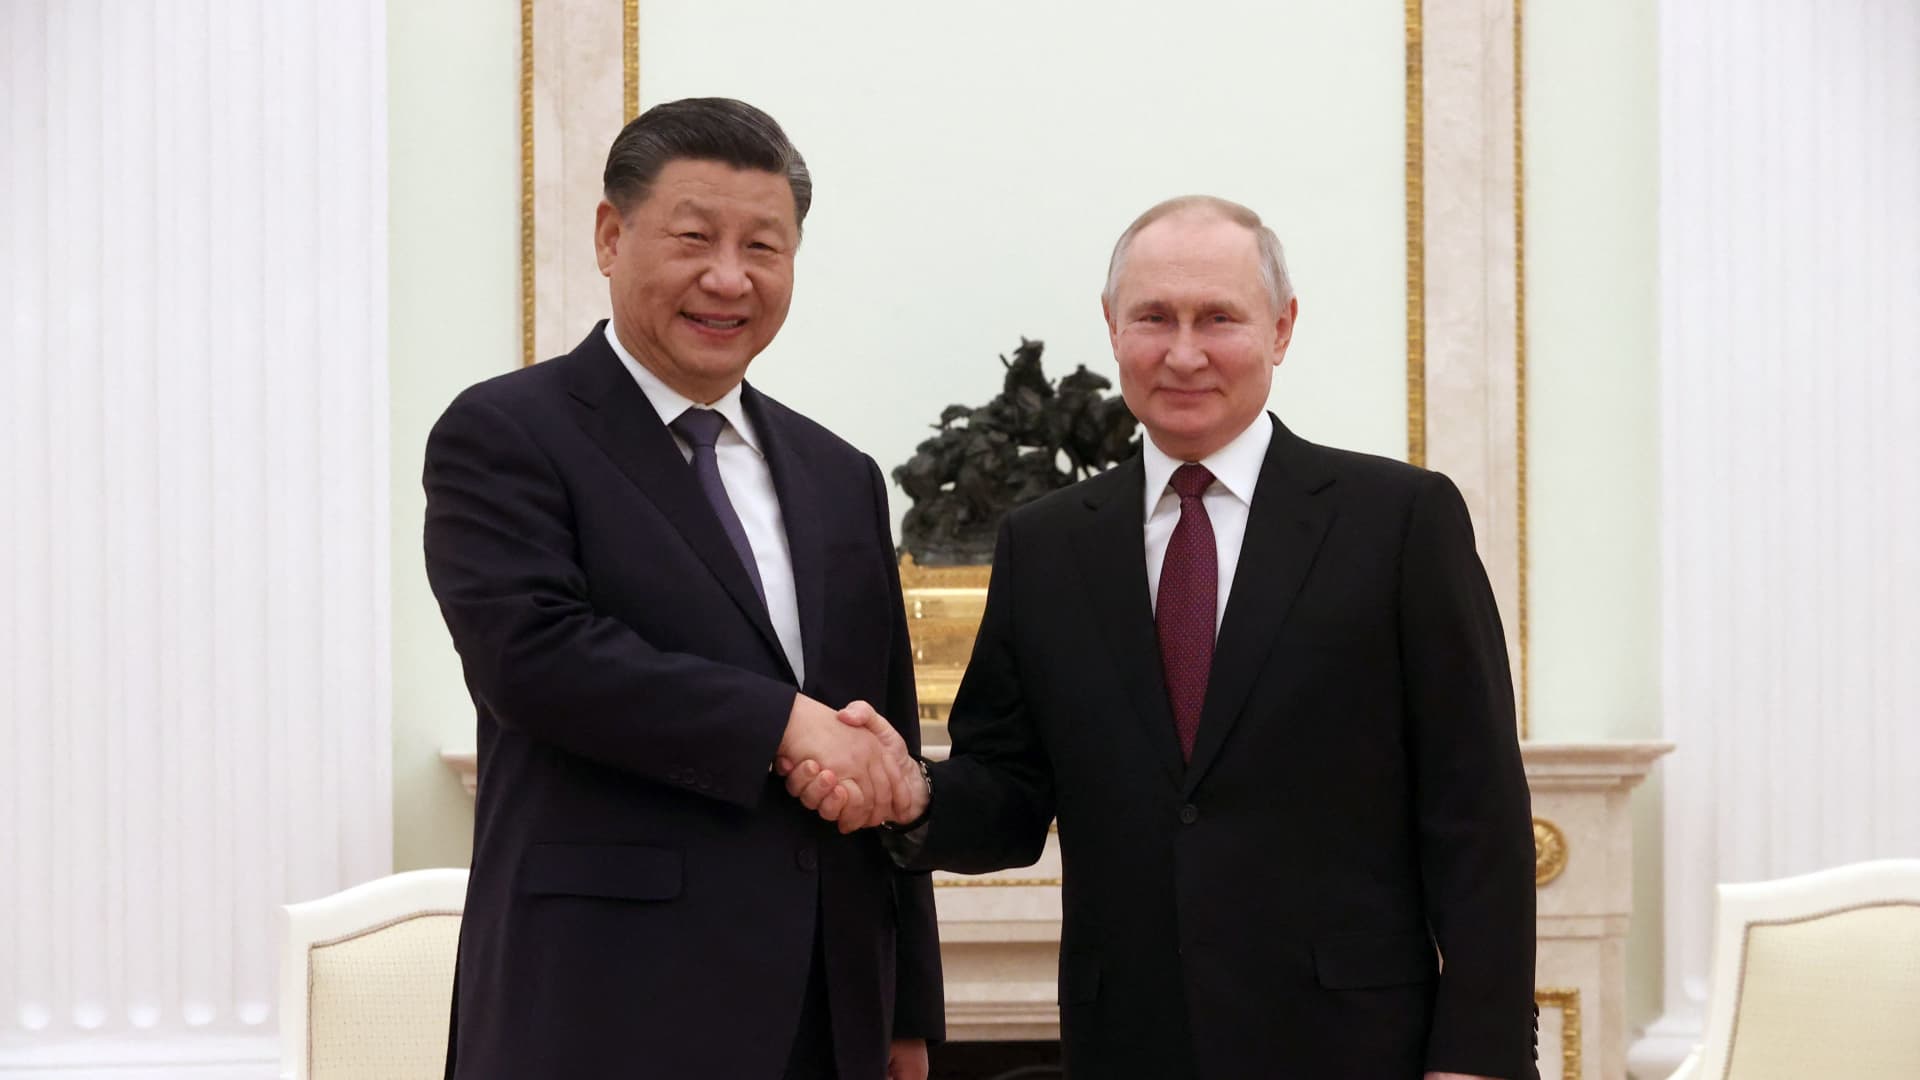 TOPSHOT - Russian President Vladimir Putin meets with China's President Xi Jinping at the Kremlin in Moscow on March 20, 2023. (Photo by Sergei KARPUKHIN / SPUTNIK / AFP) (Photo by SERGEI KARPUKHIN/SPUTNIK/AFP via Getty Images)